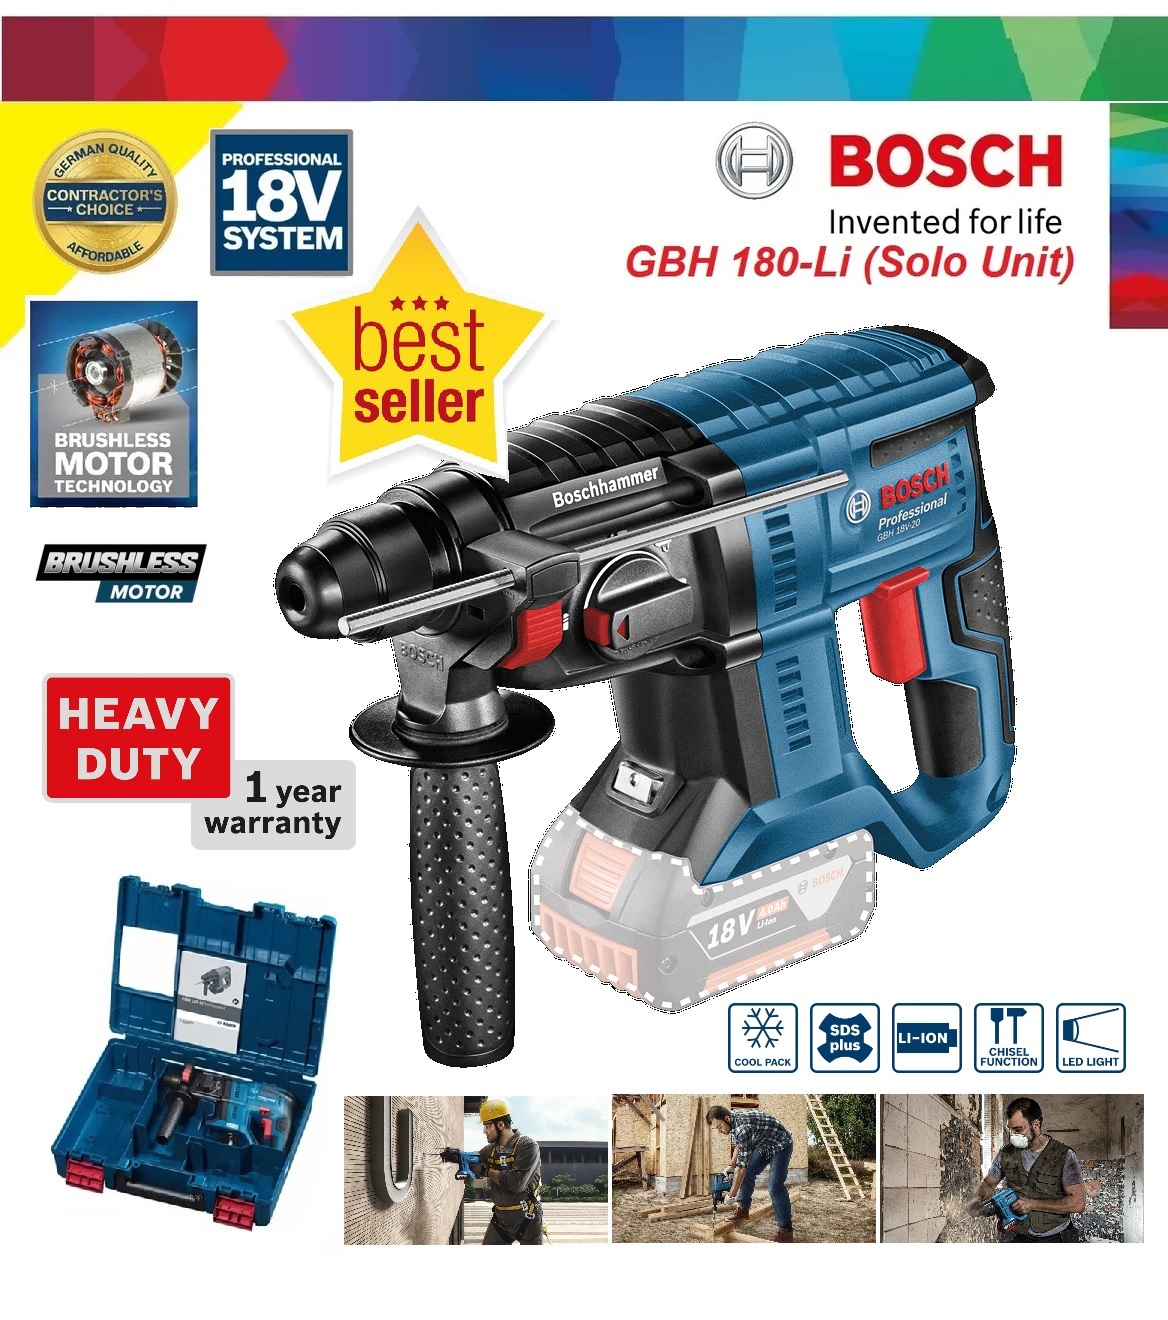 GBH 18V-EC Cordless Rotary Hammer with SDS plus